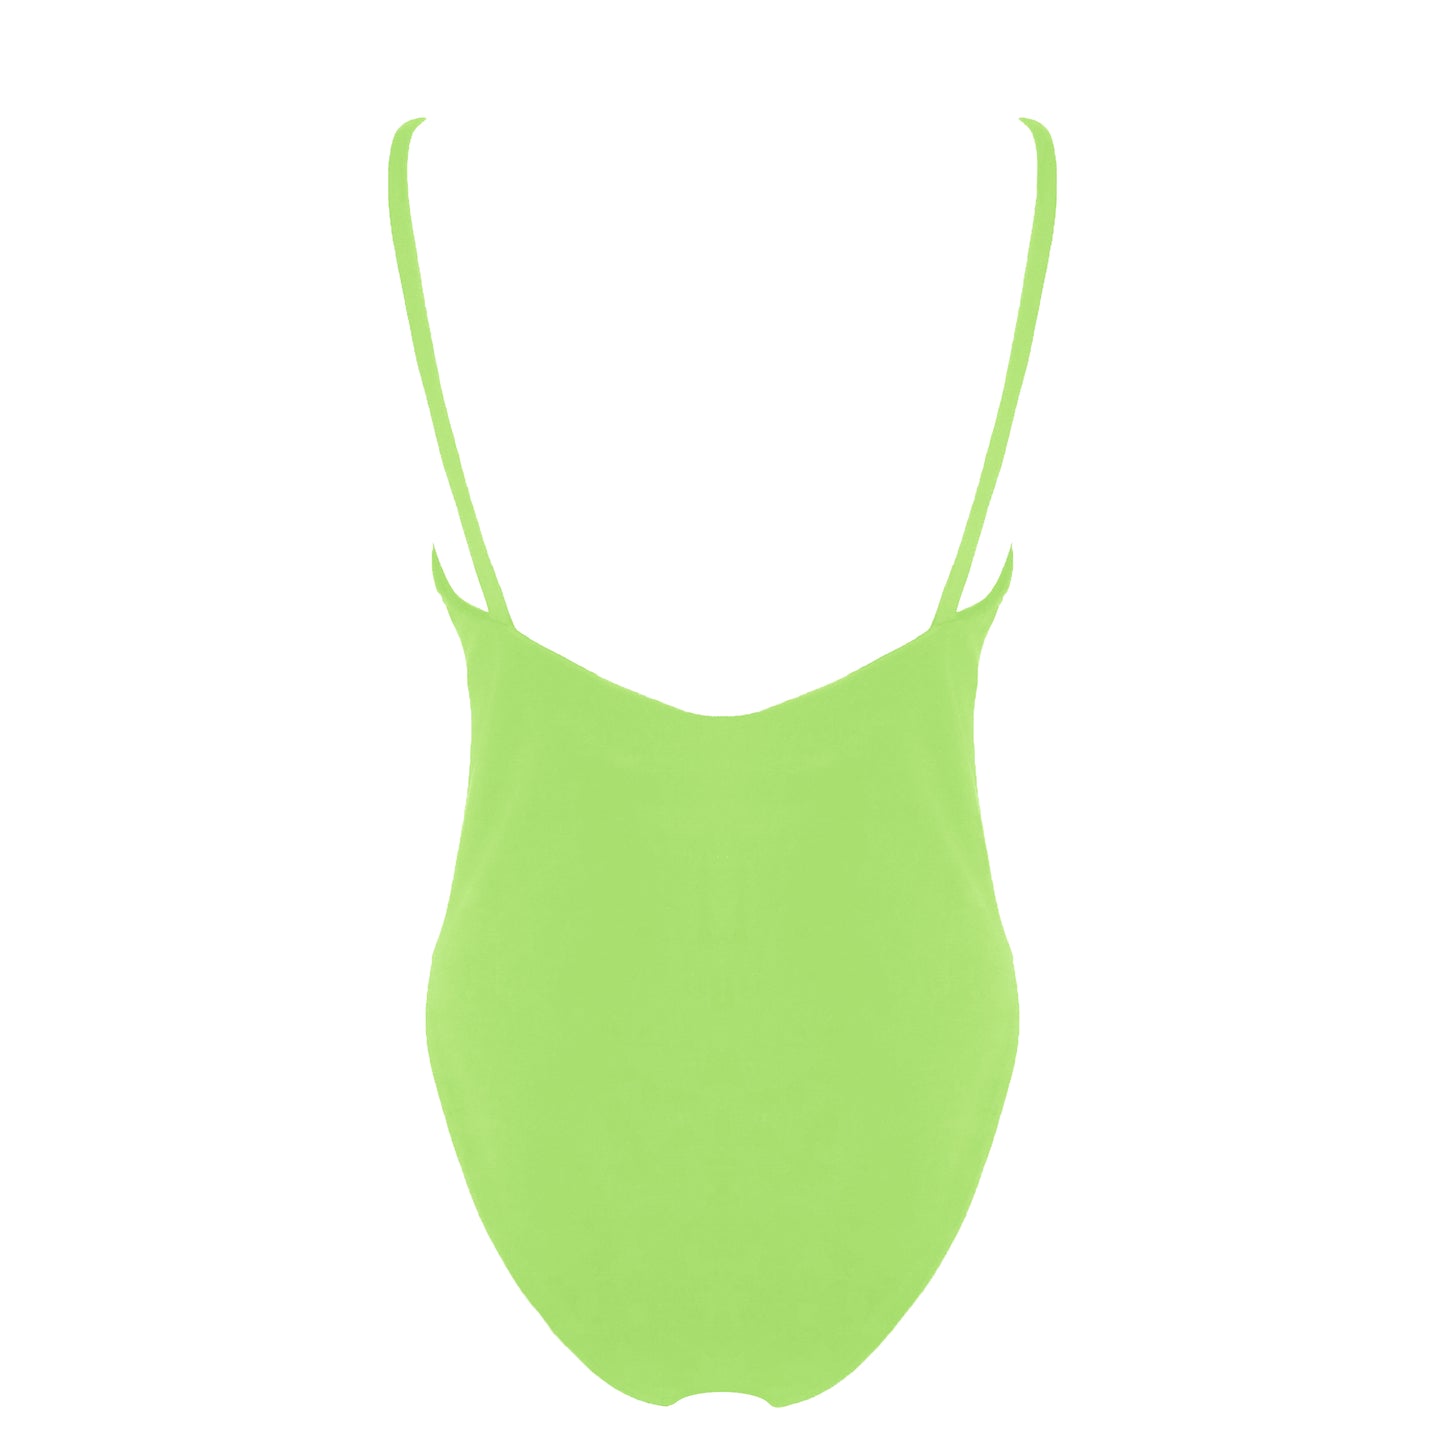 Back view of light neon green simplistic plunging v-neck one piece swimsuit with a low v-back, high cut legs and full coverage.